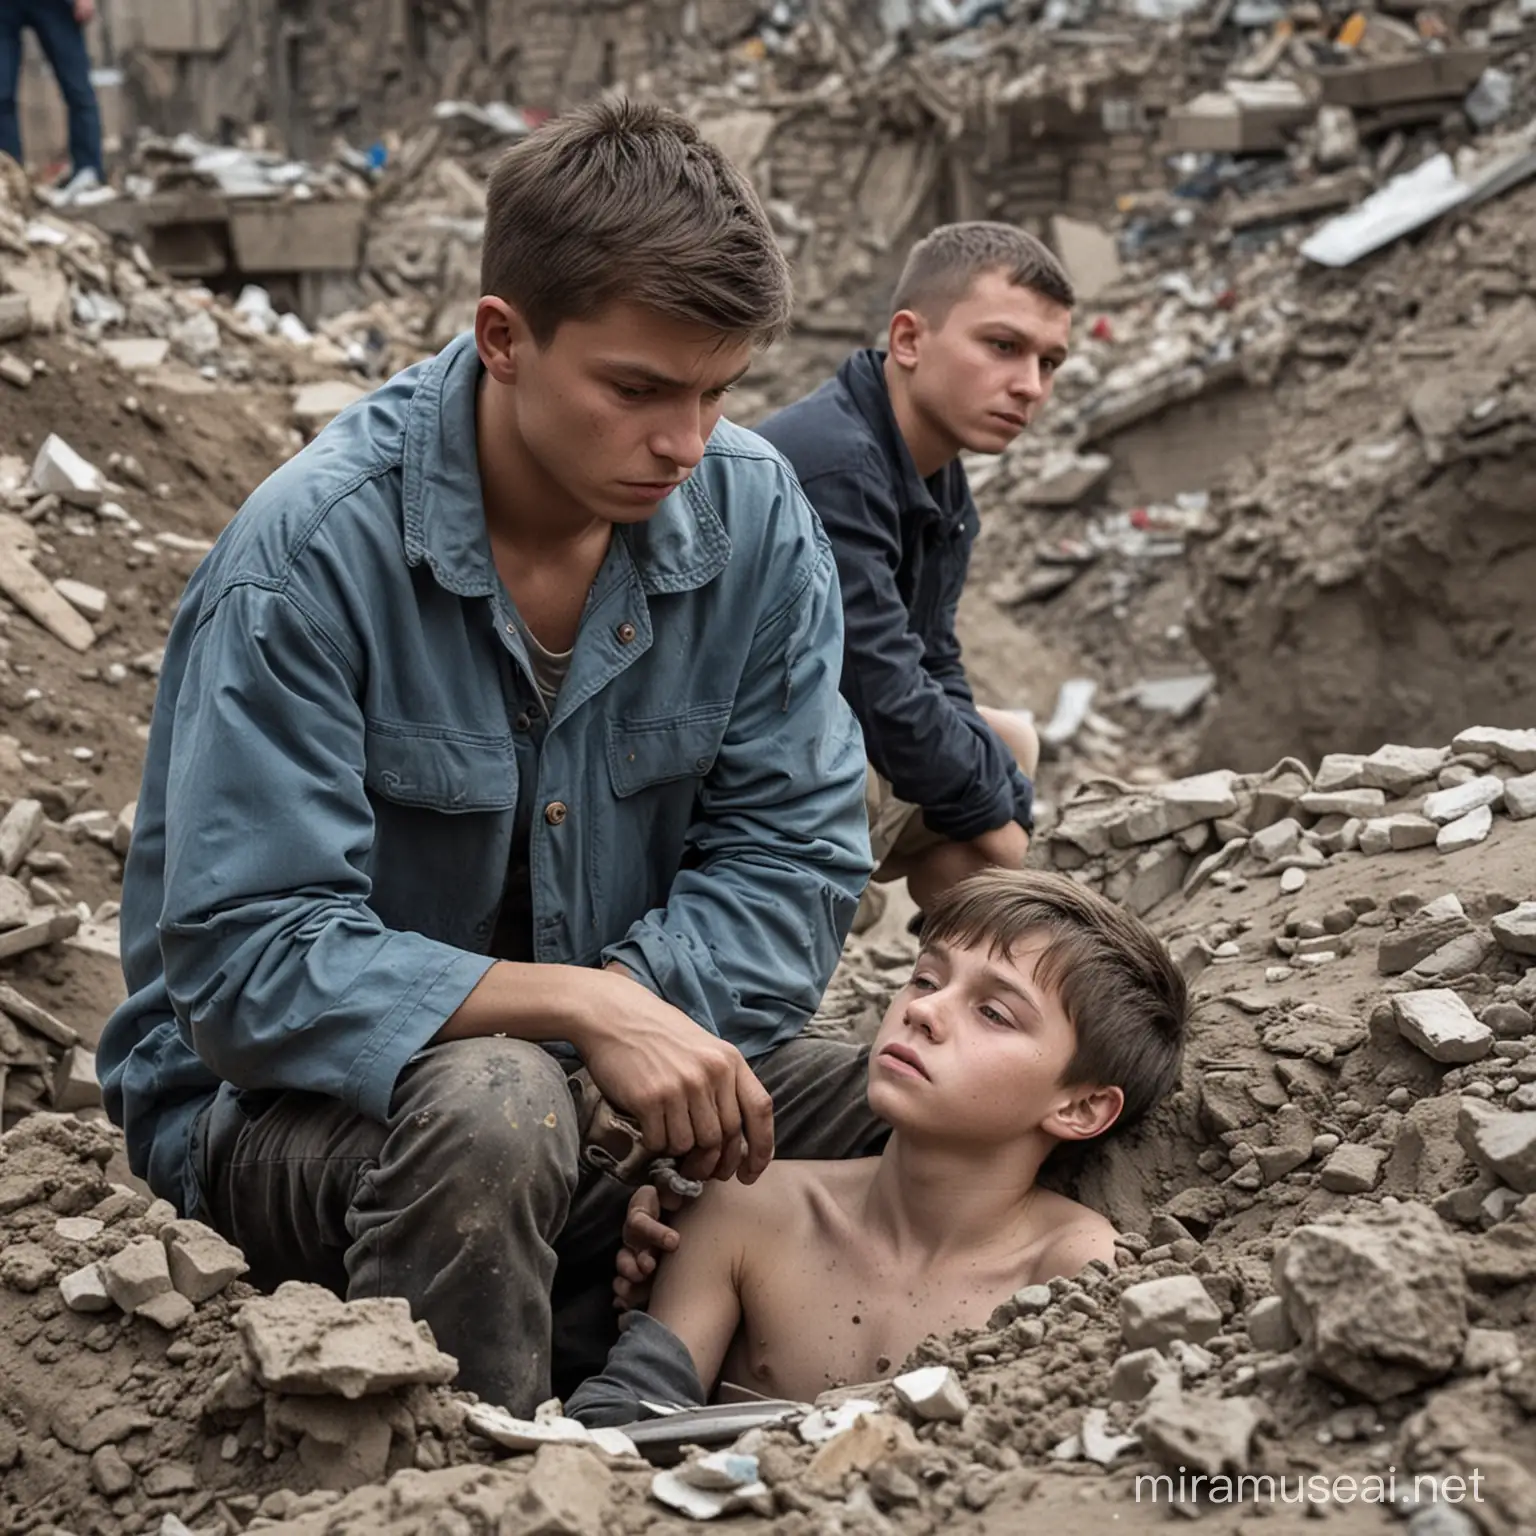 Emotionless Ukrainian Teen Finds Younger Brother Buried in Rubble